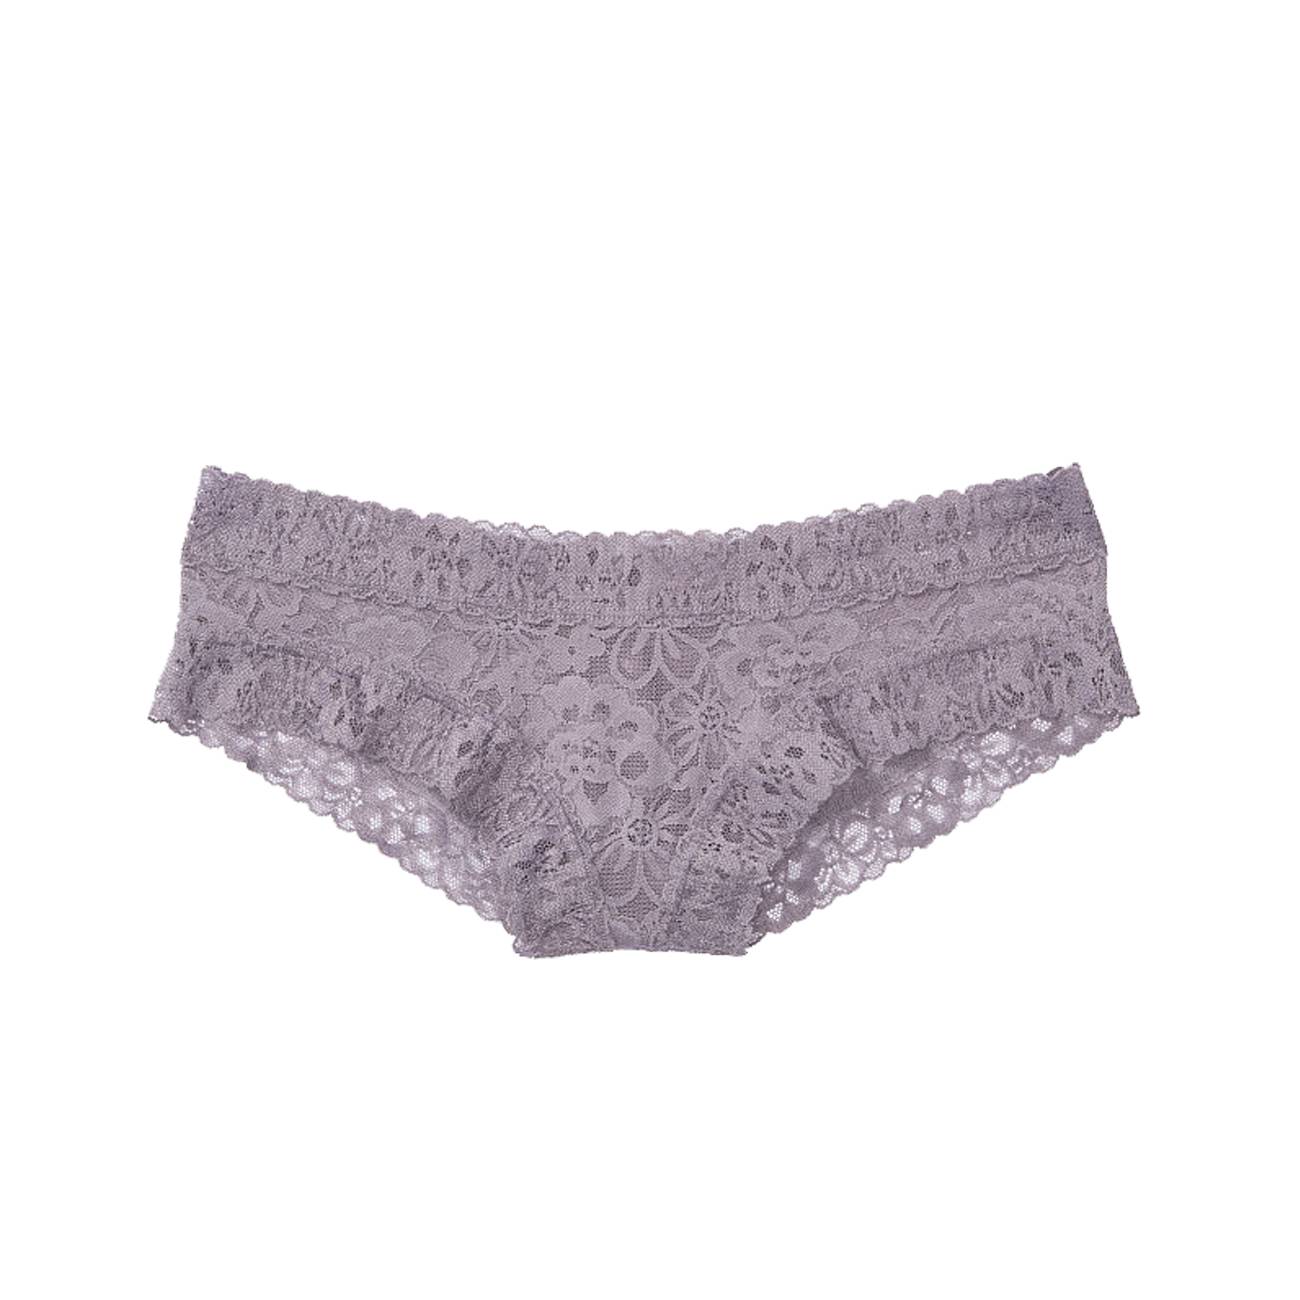 Floral Lace Cheeky Panty XS bestvalue.eu